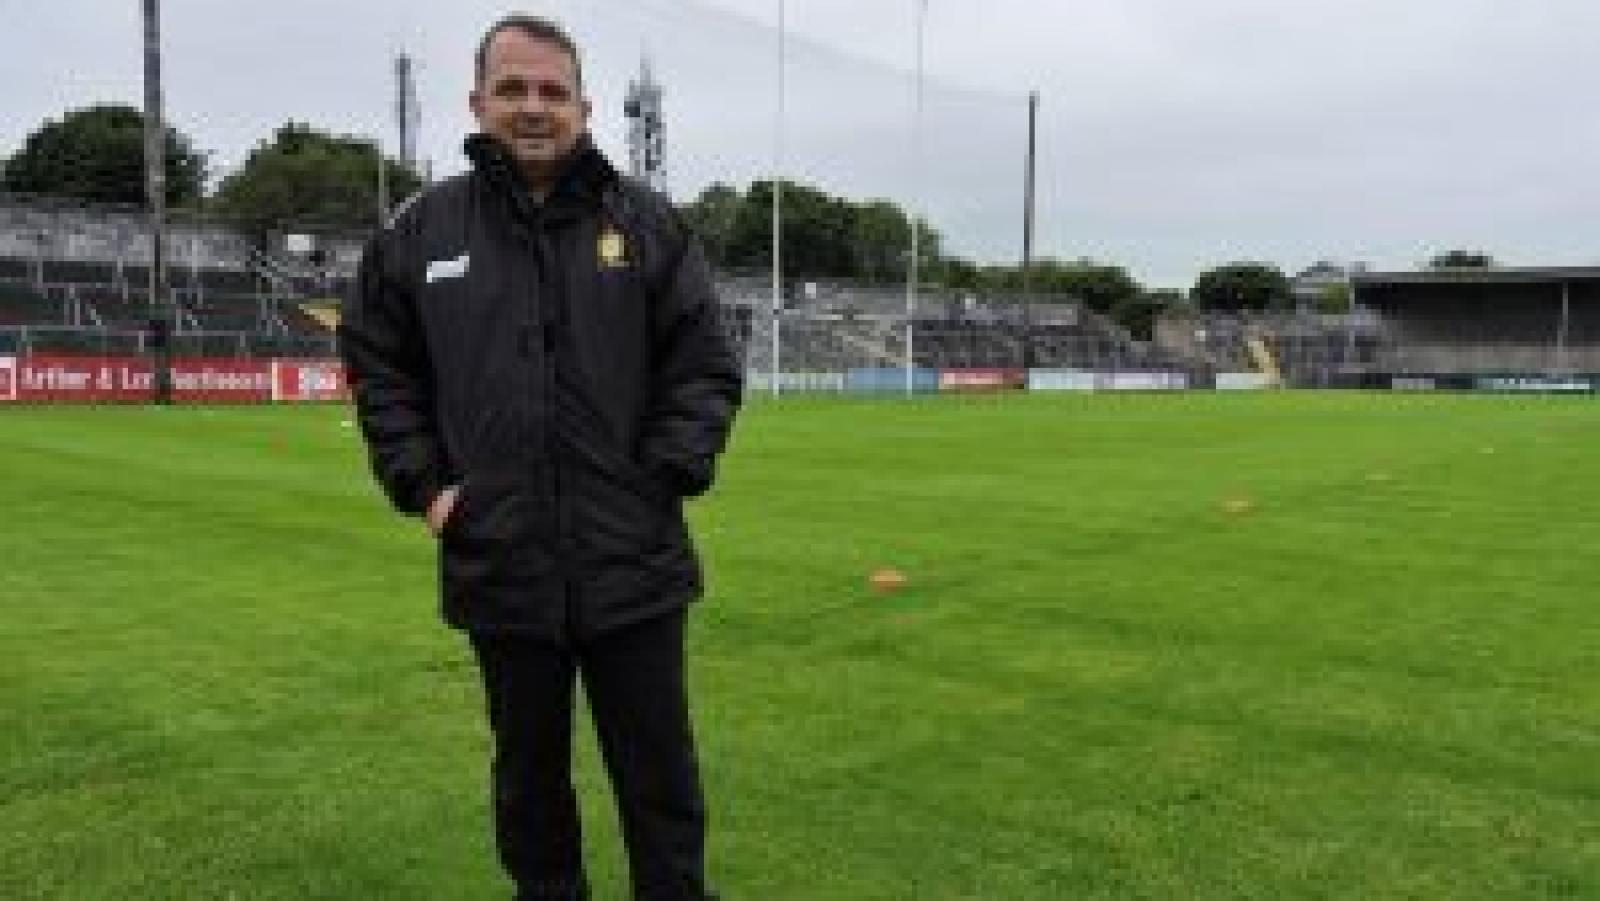 Davy Fitzgerald on a hurling pitch